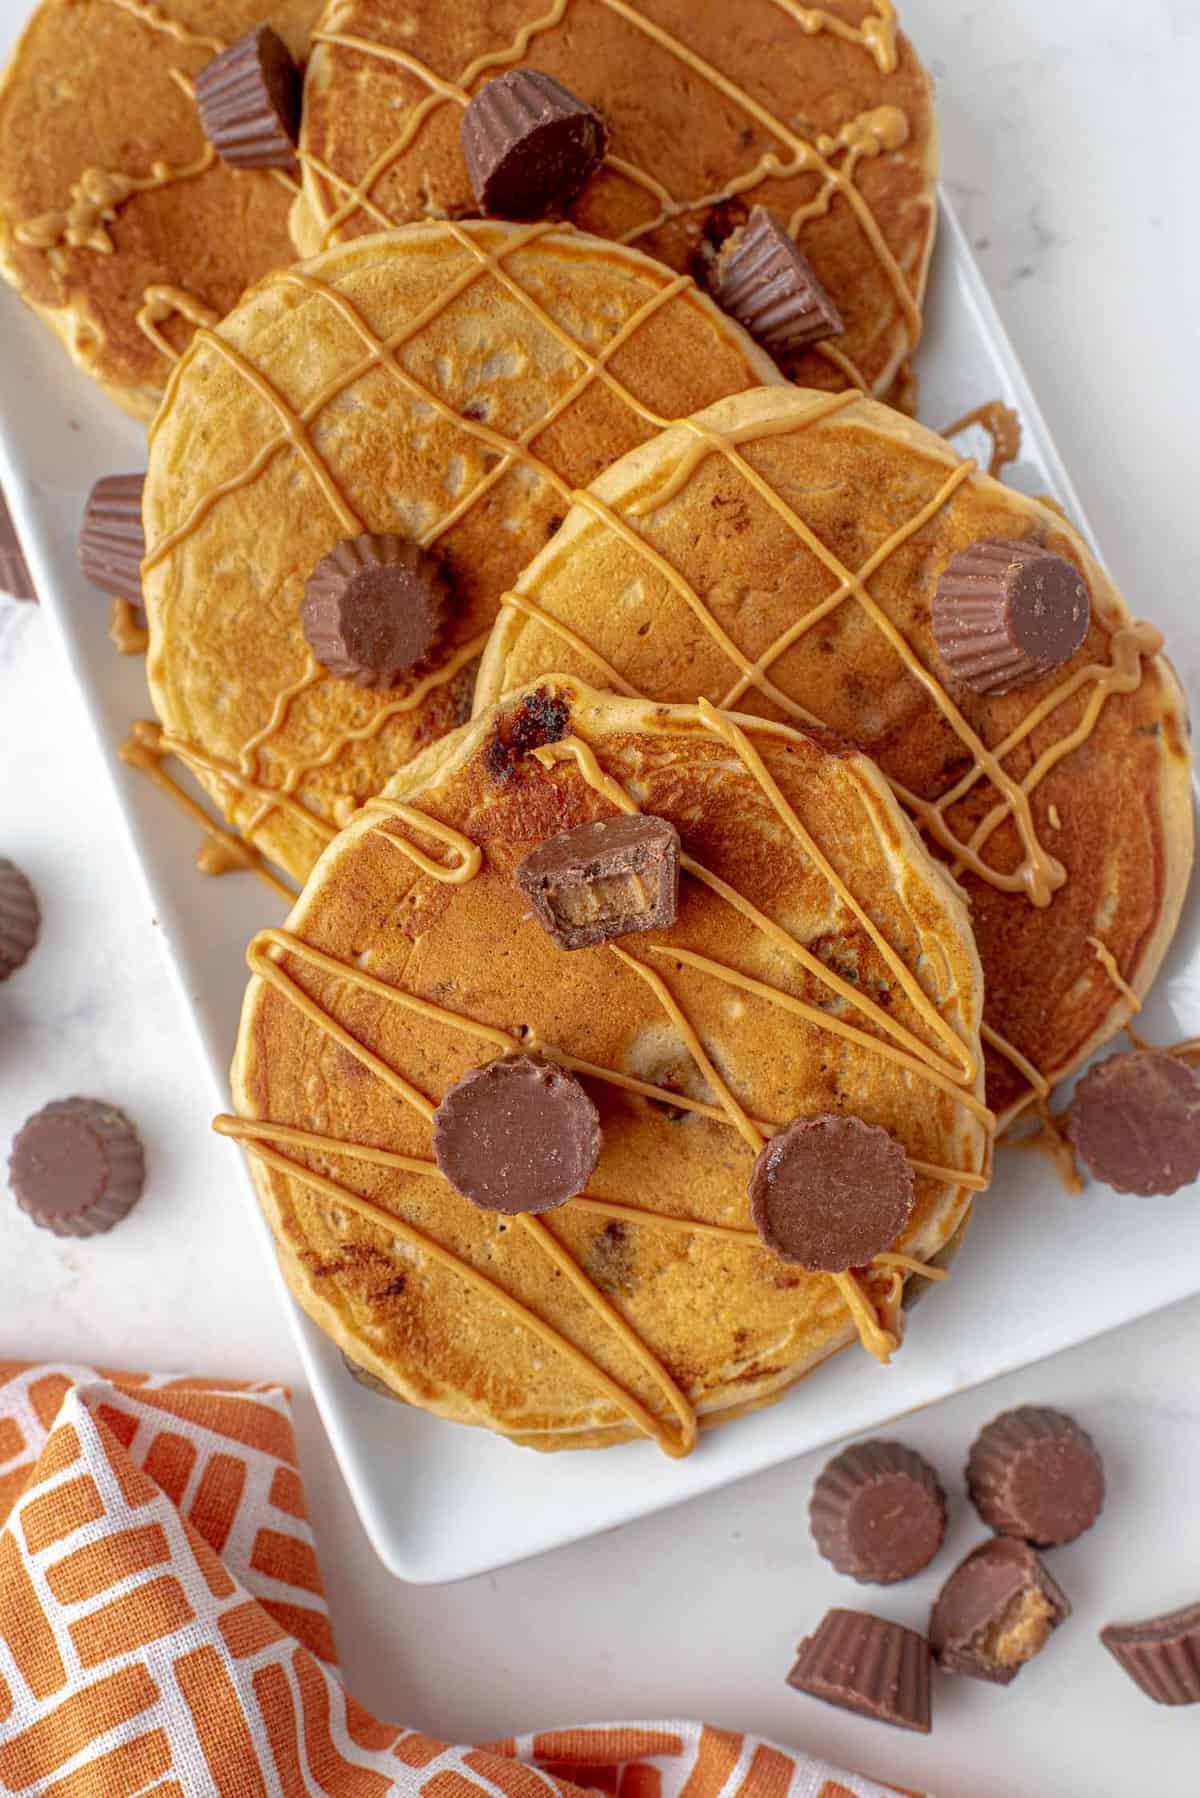 Reese's peanut butter cup pancakes drizzled with peanut butter.